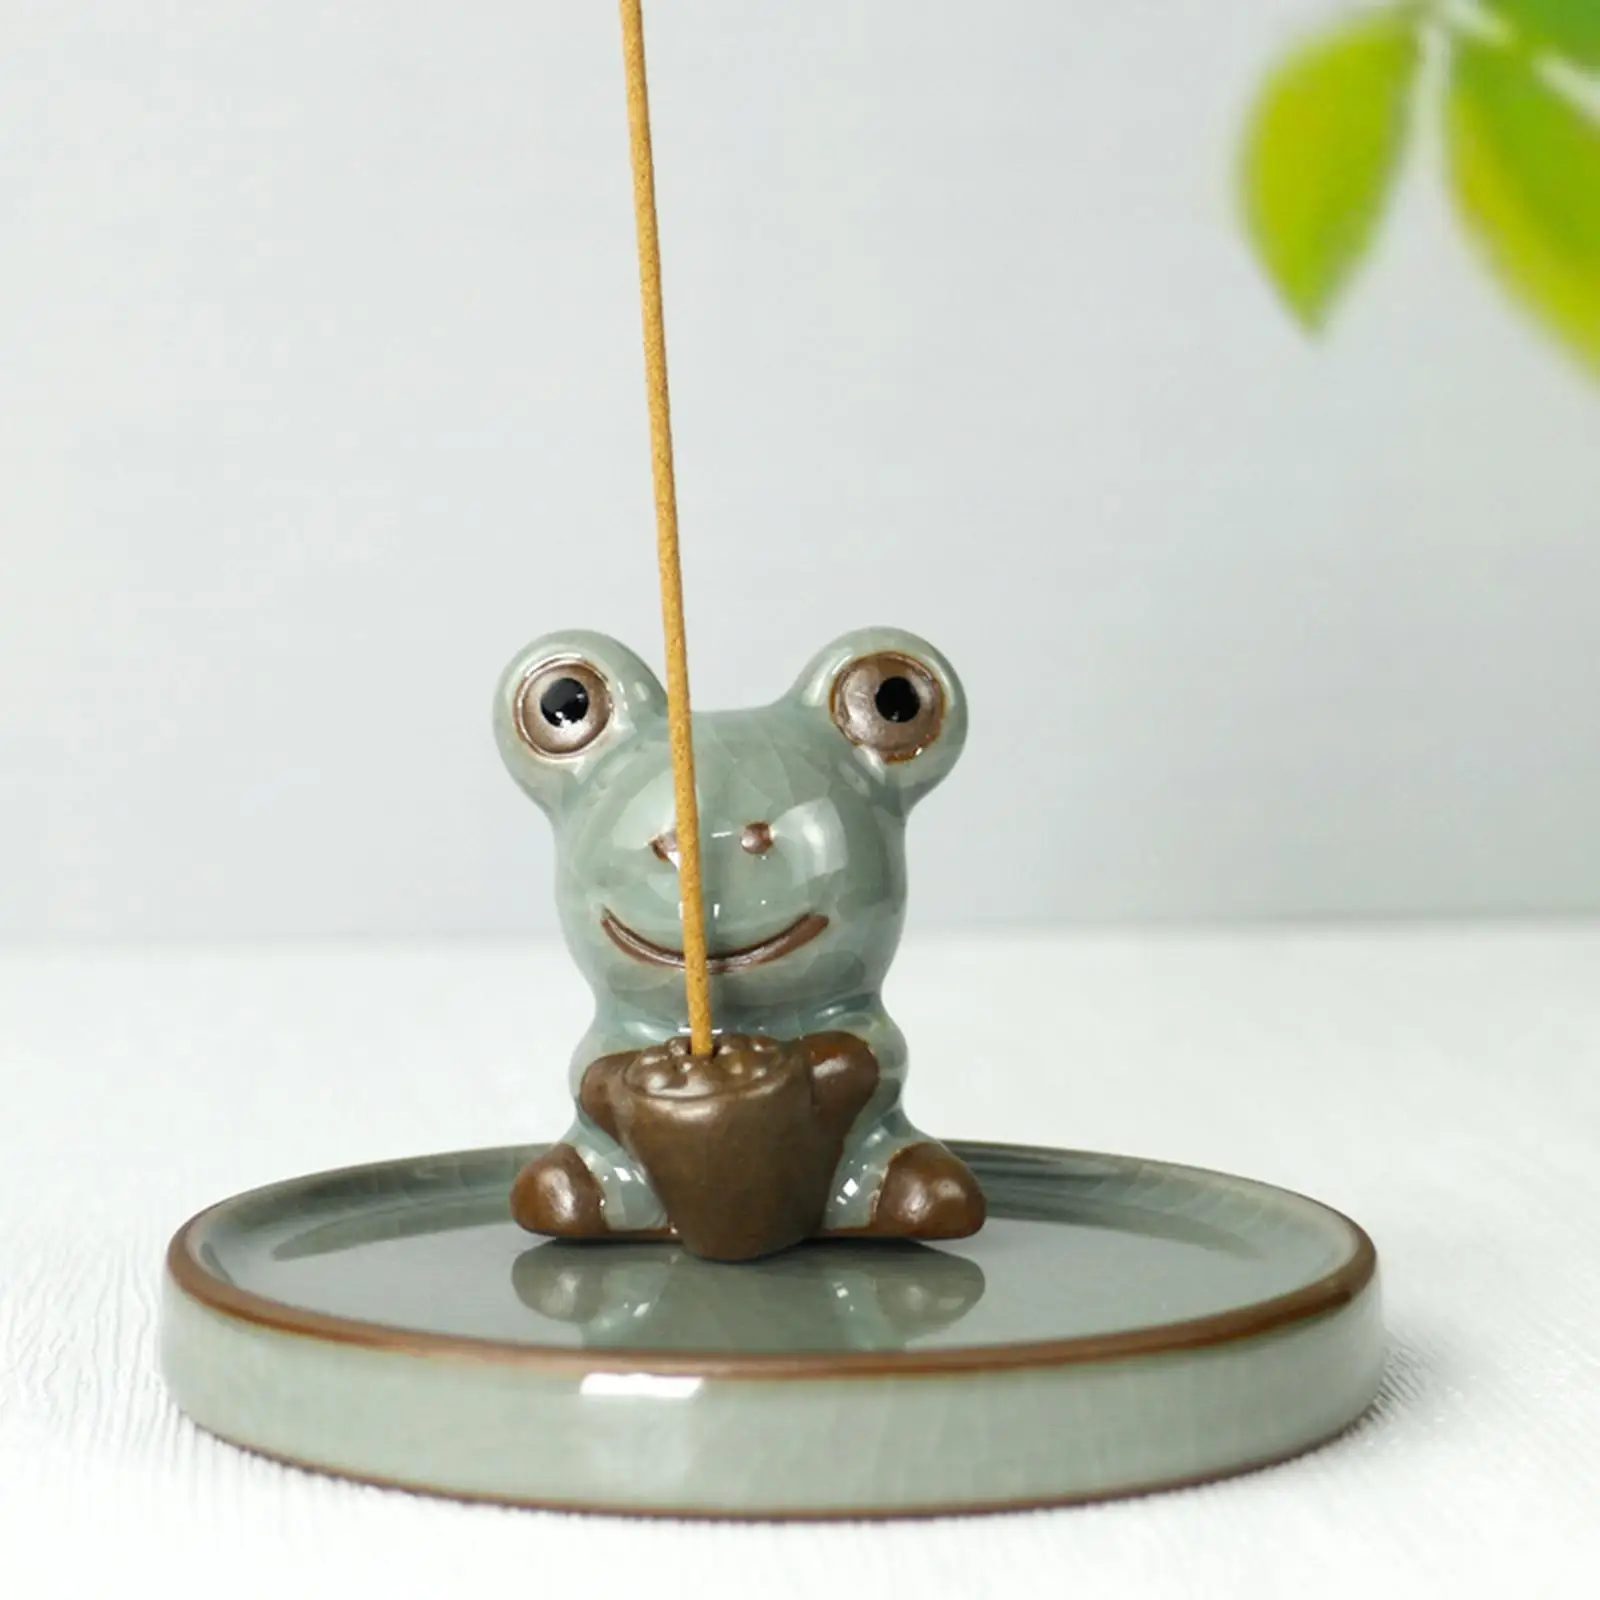 Cute Insence Tray Ceramic Insencents Burner Holder for s Animal Statue for Home Decoration and 